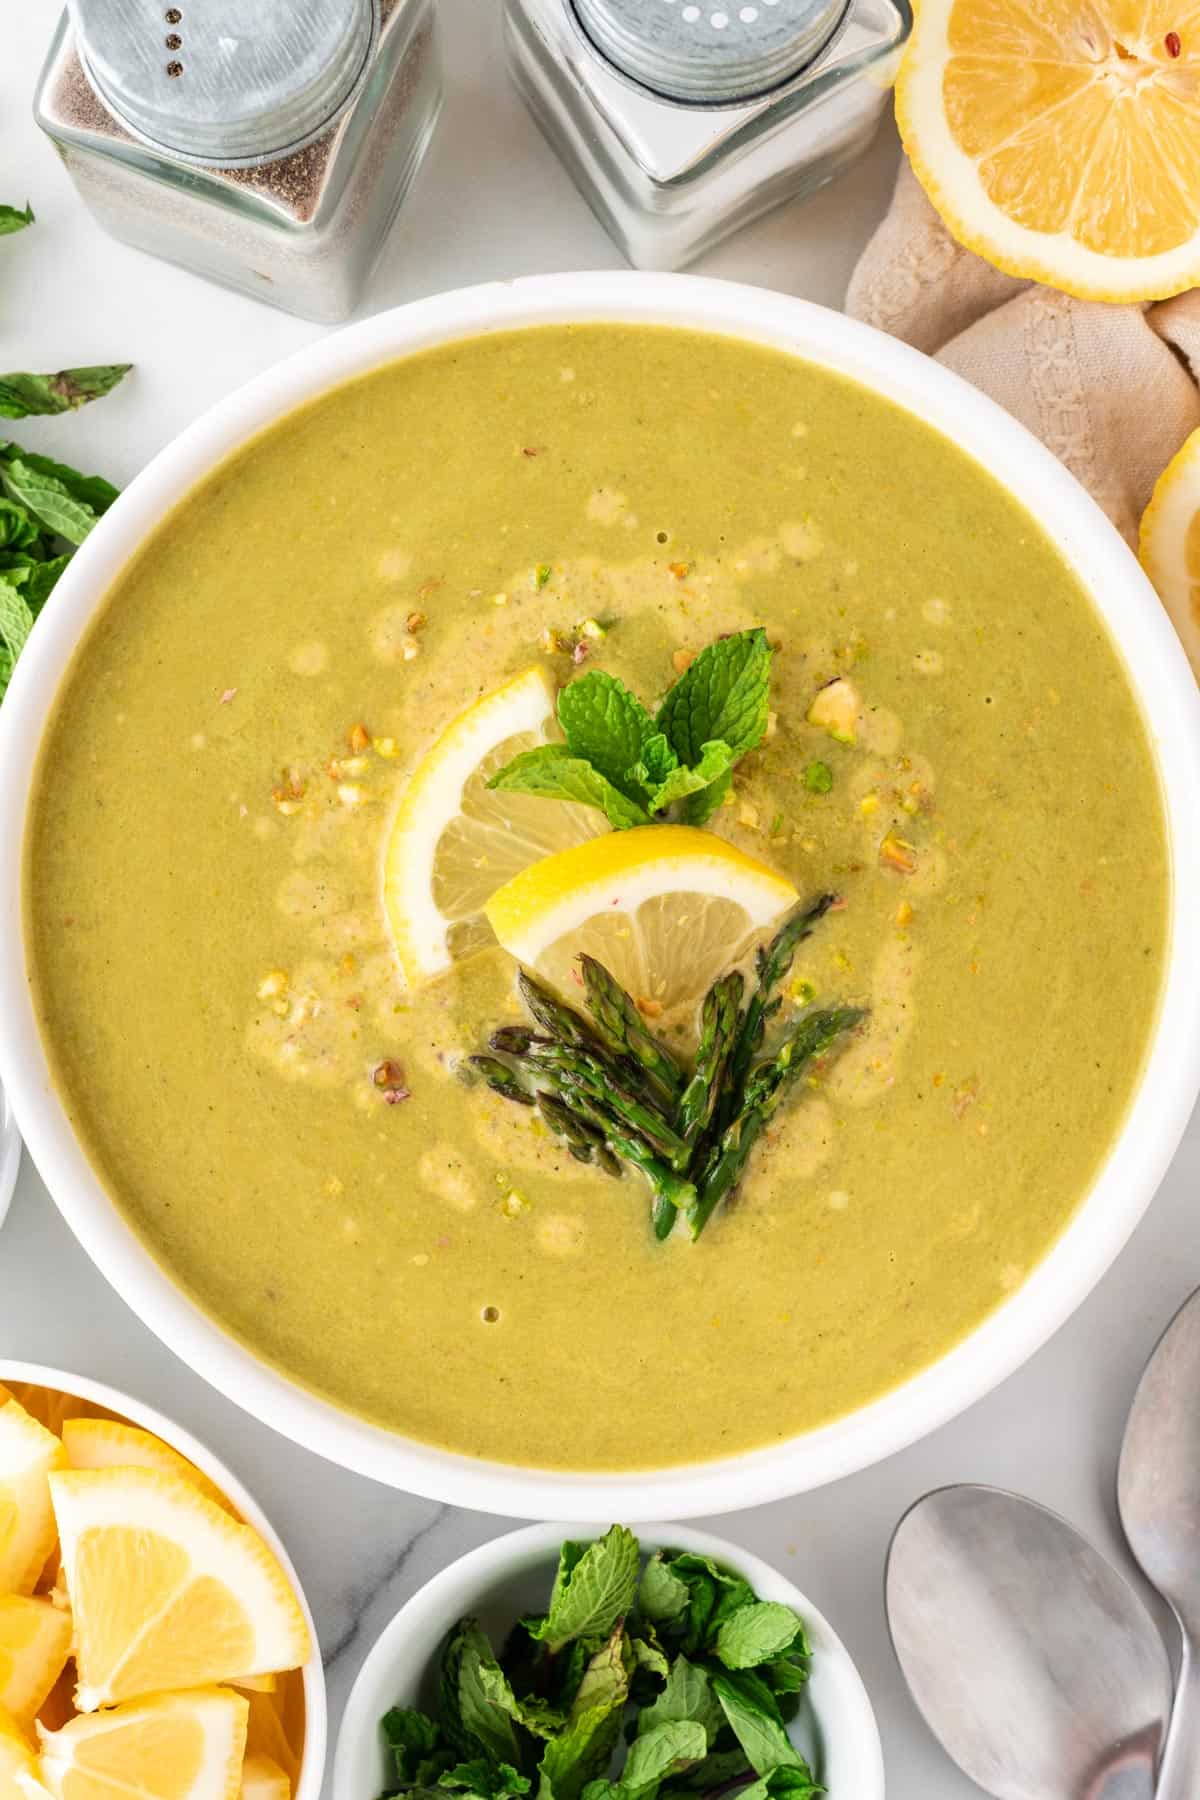 A picture of vegan asparagus soup with lemon, asparagus tips, and mint leaves on top.